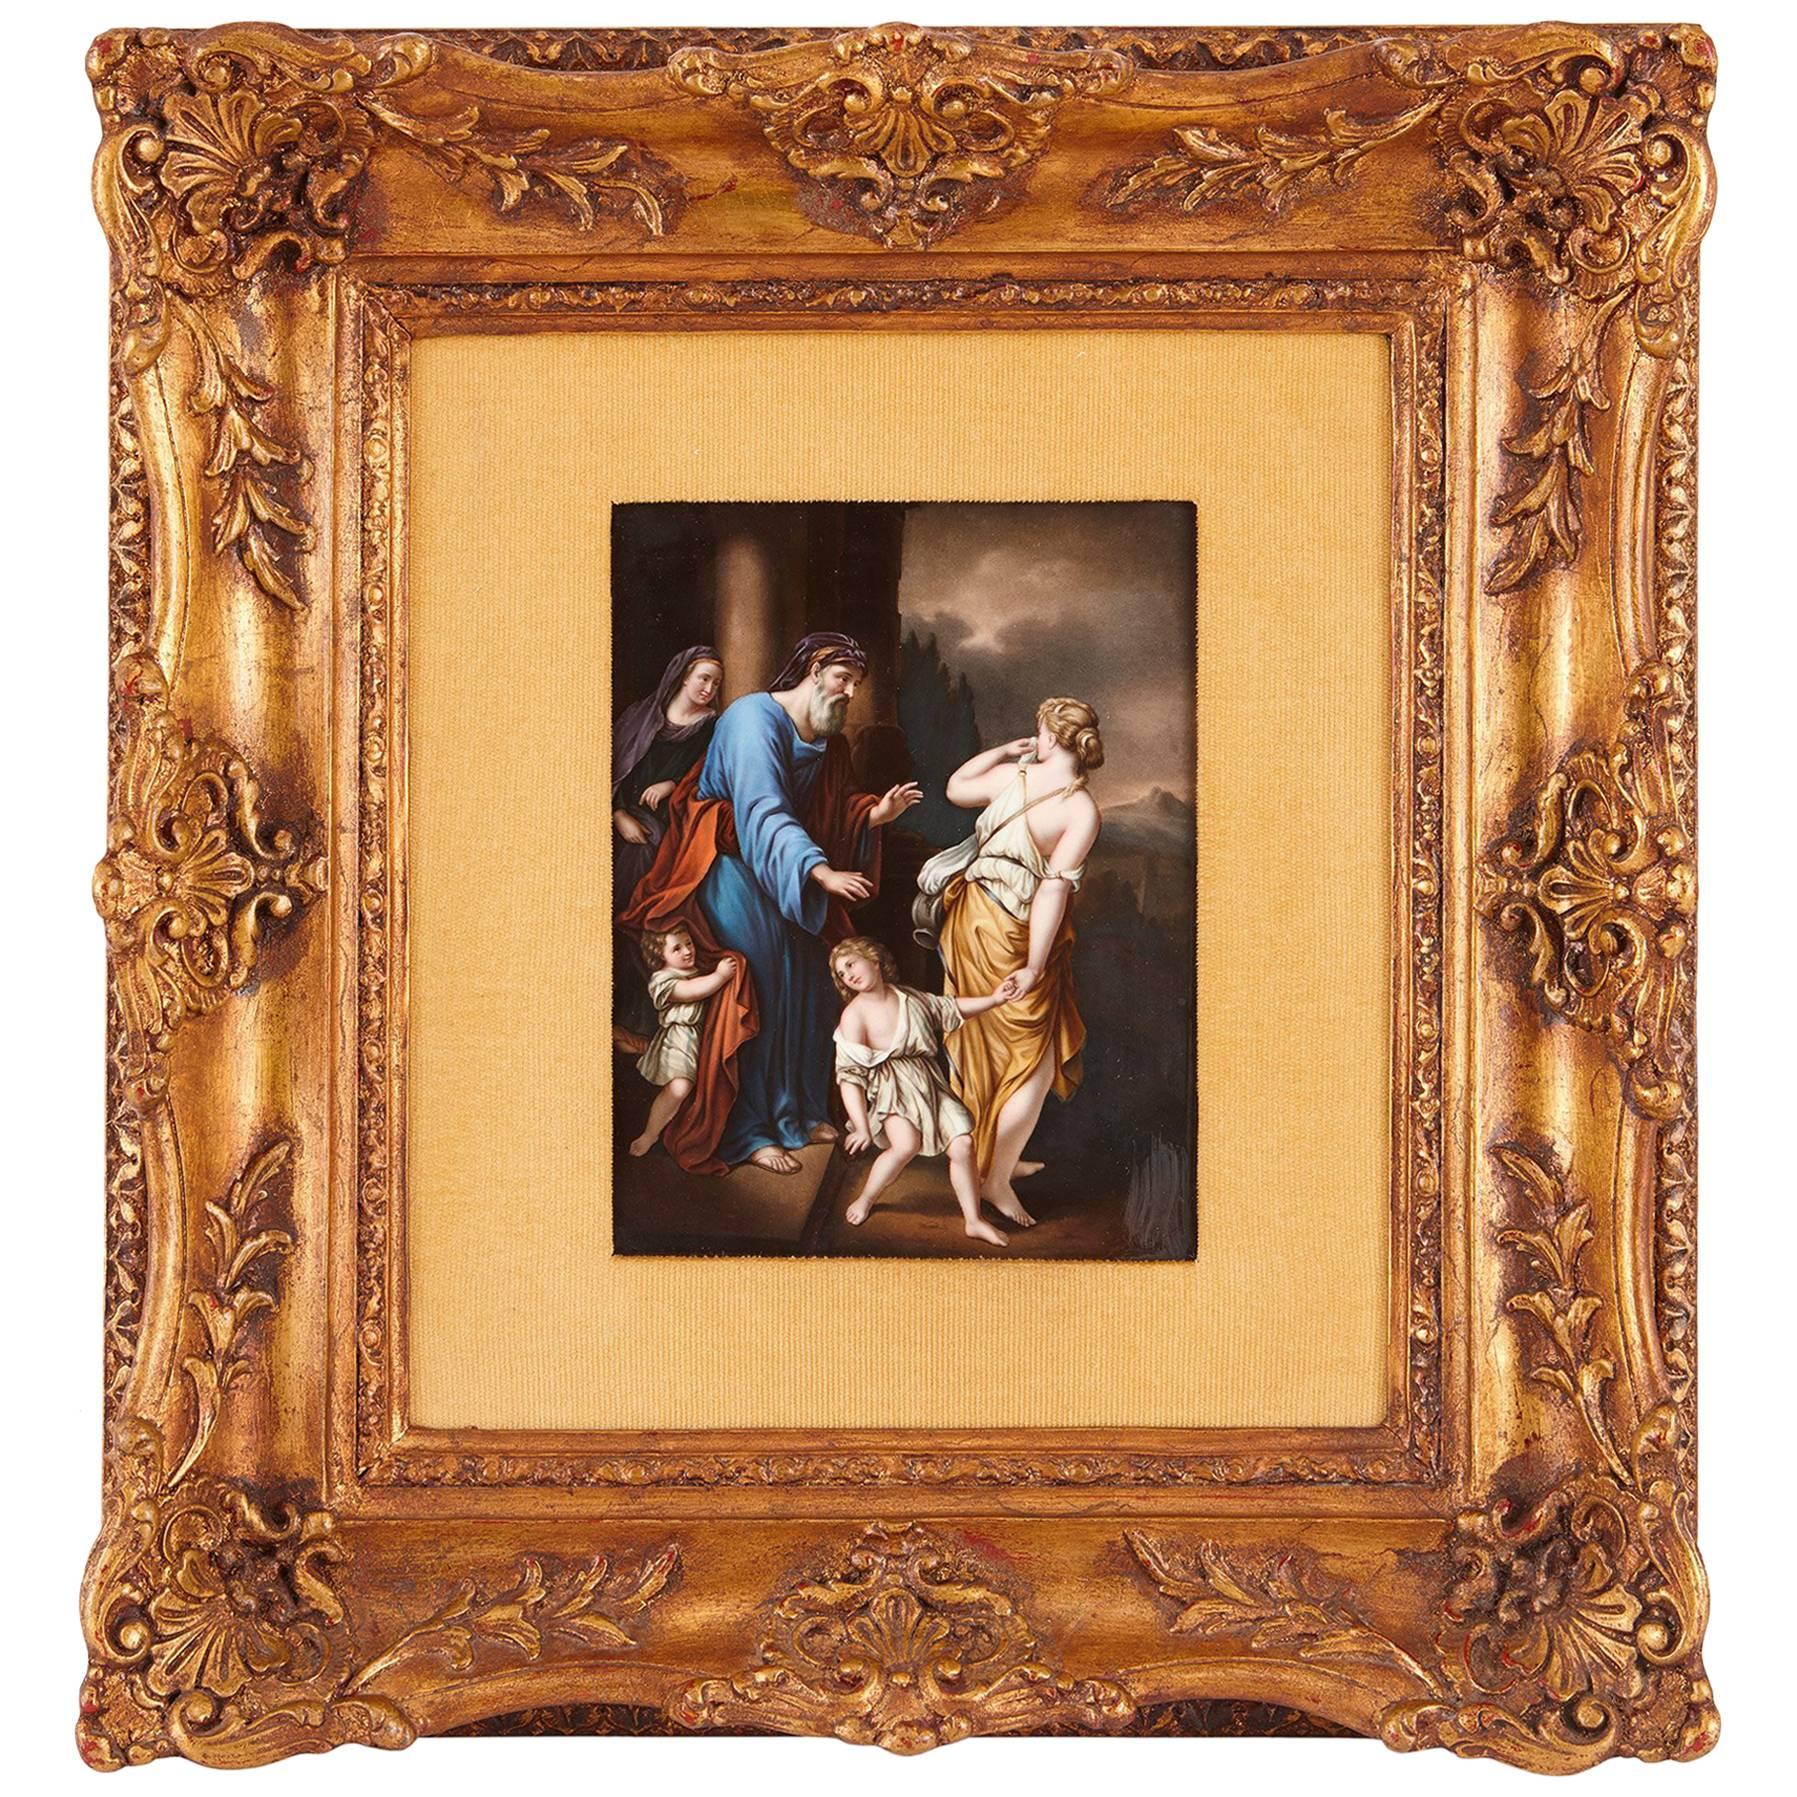 19th Century KPM Porcelain Plaque, After Old Master Painting